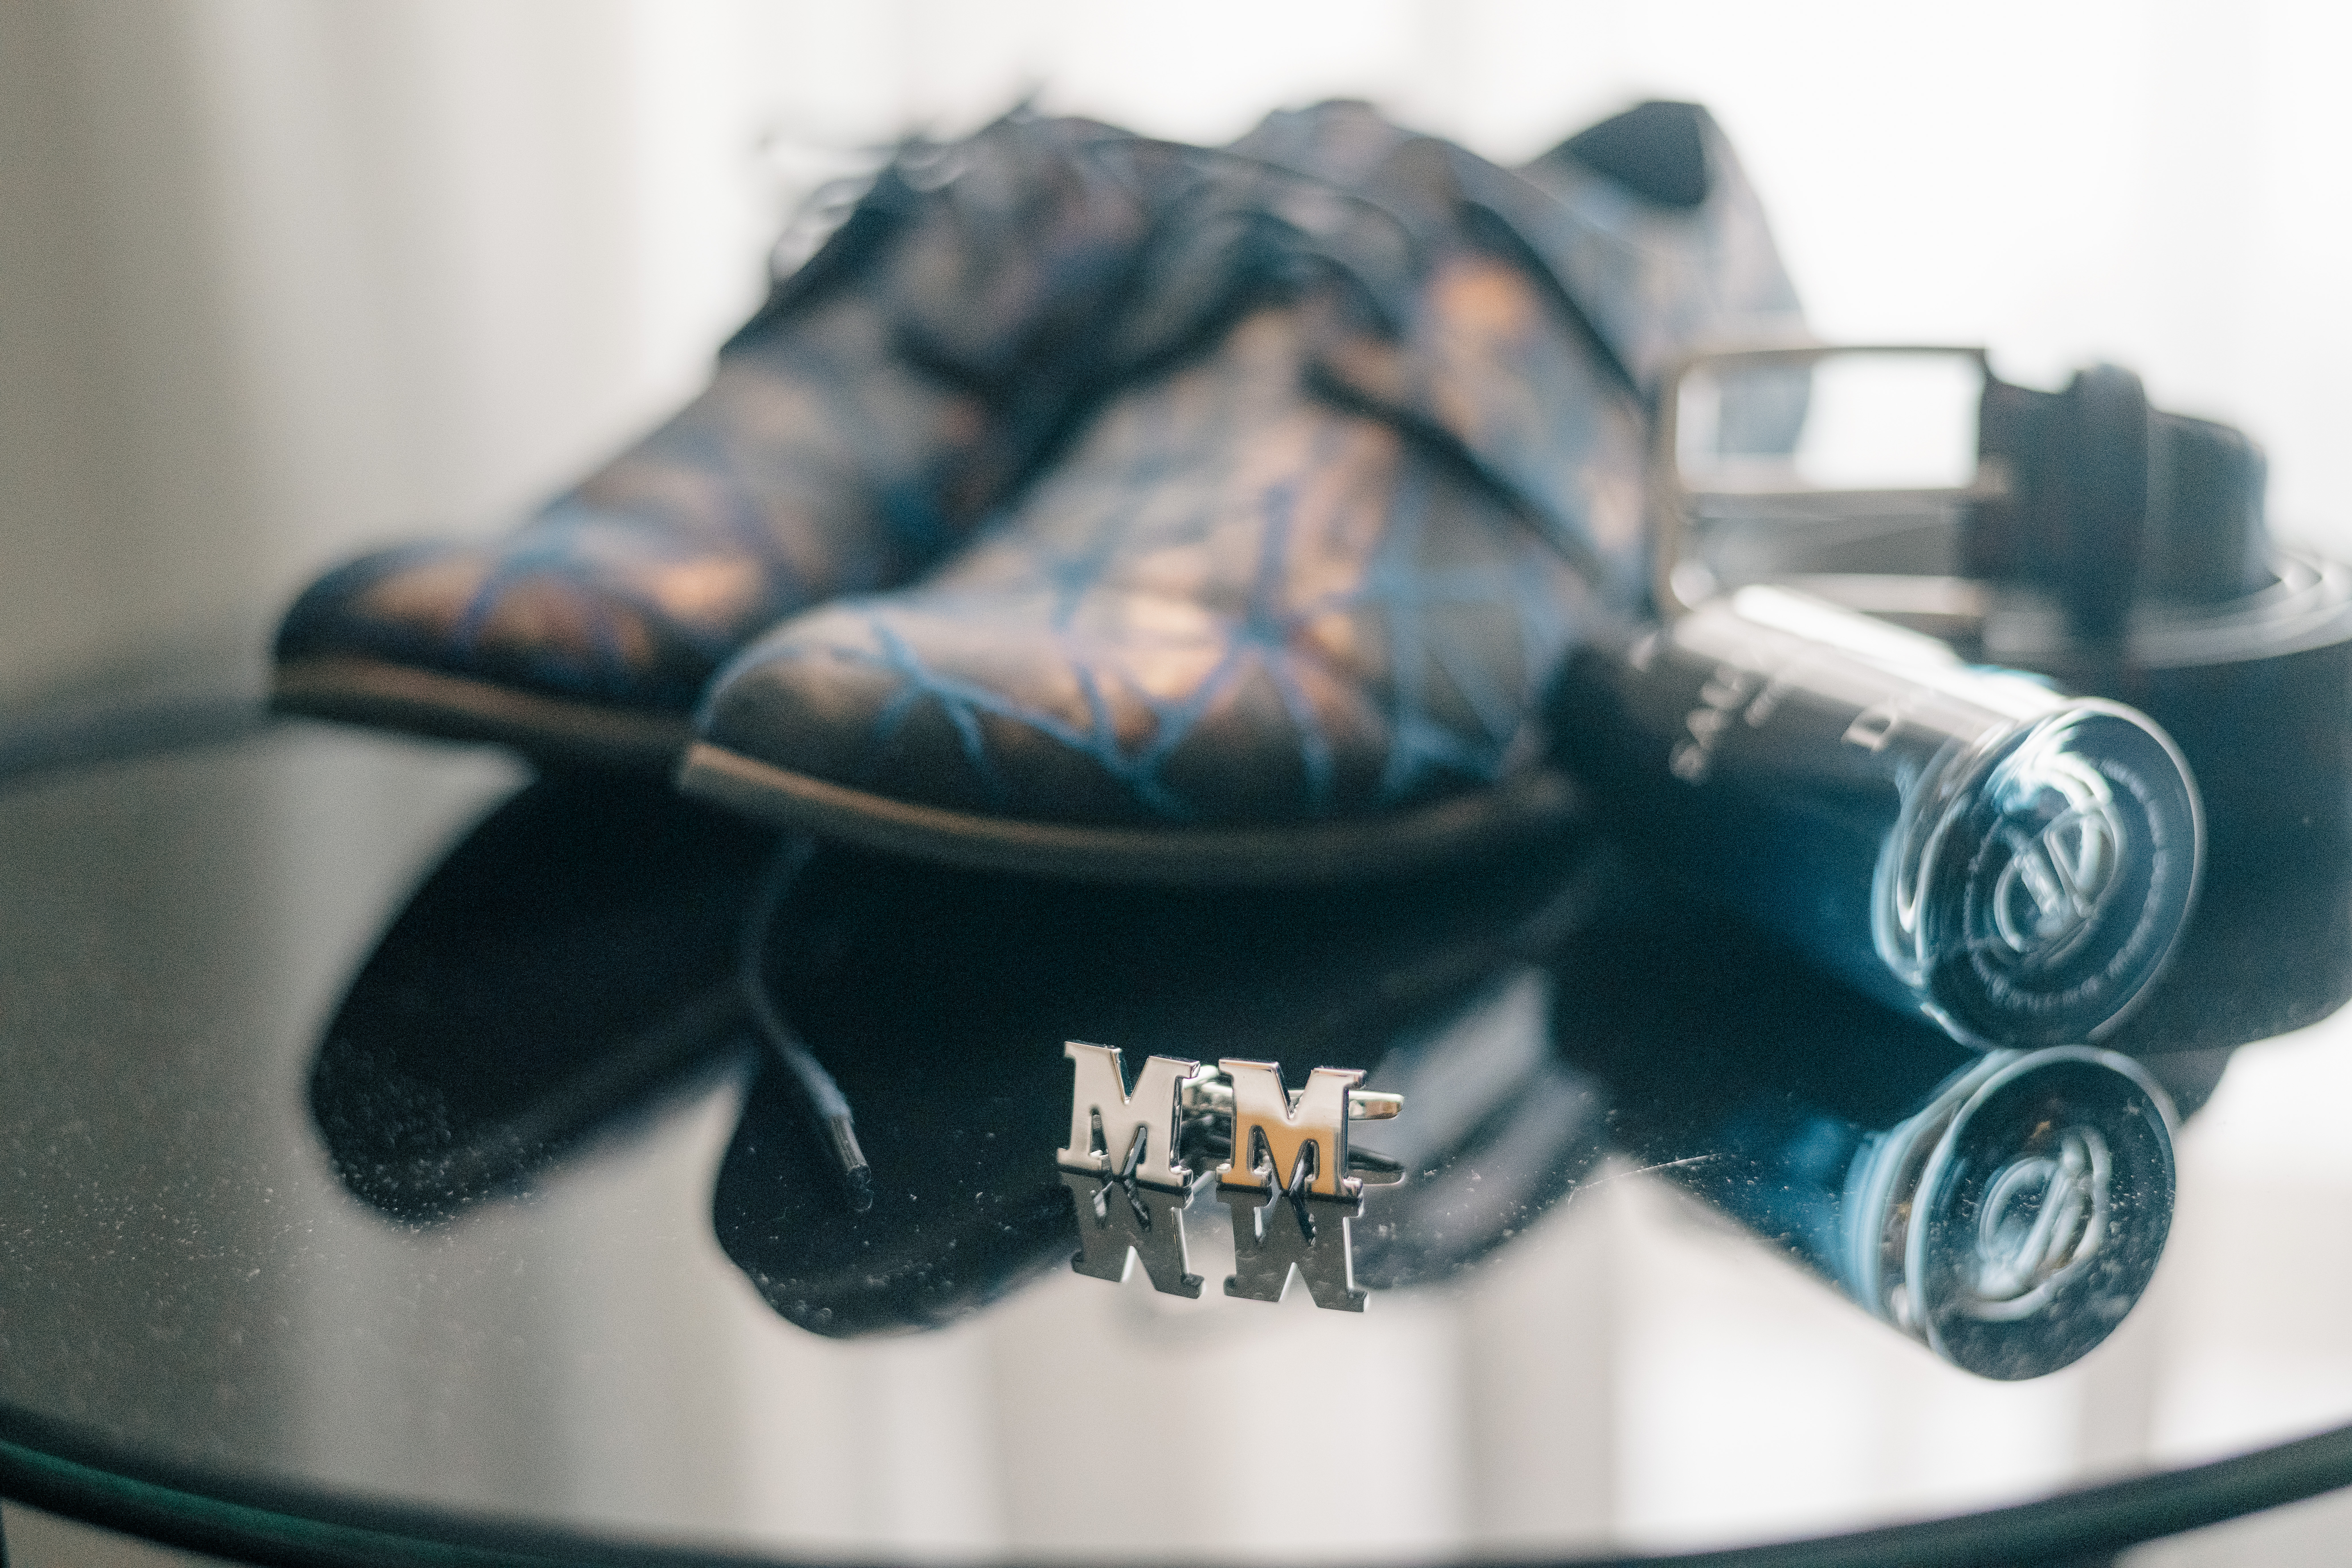 Grooms detail shot of cufflinks and shoes on a reflective glass table